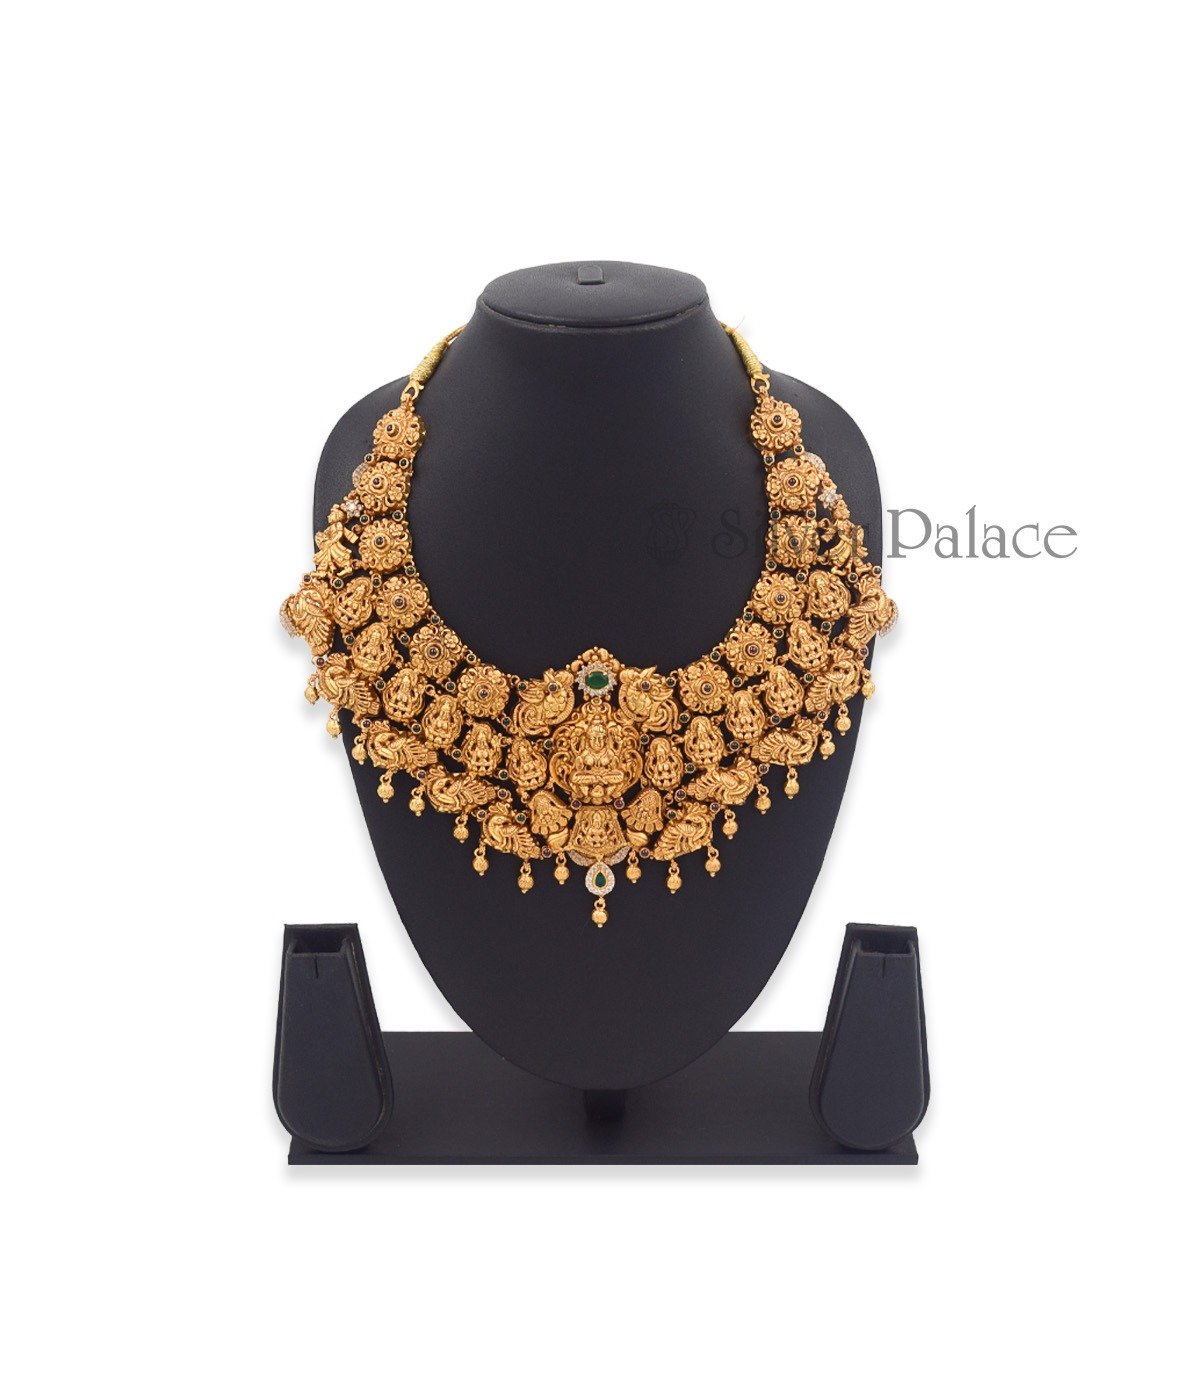 GOLD POLISHED TRADITIONAL TEMPLE JEWELLERY NECKLACE 